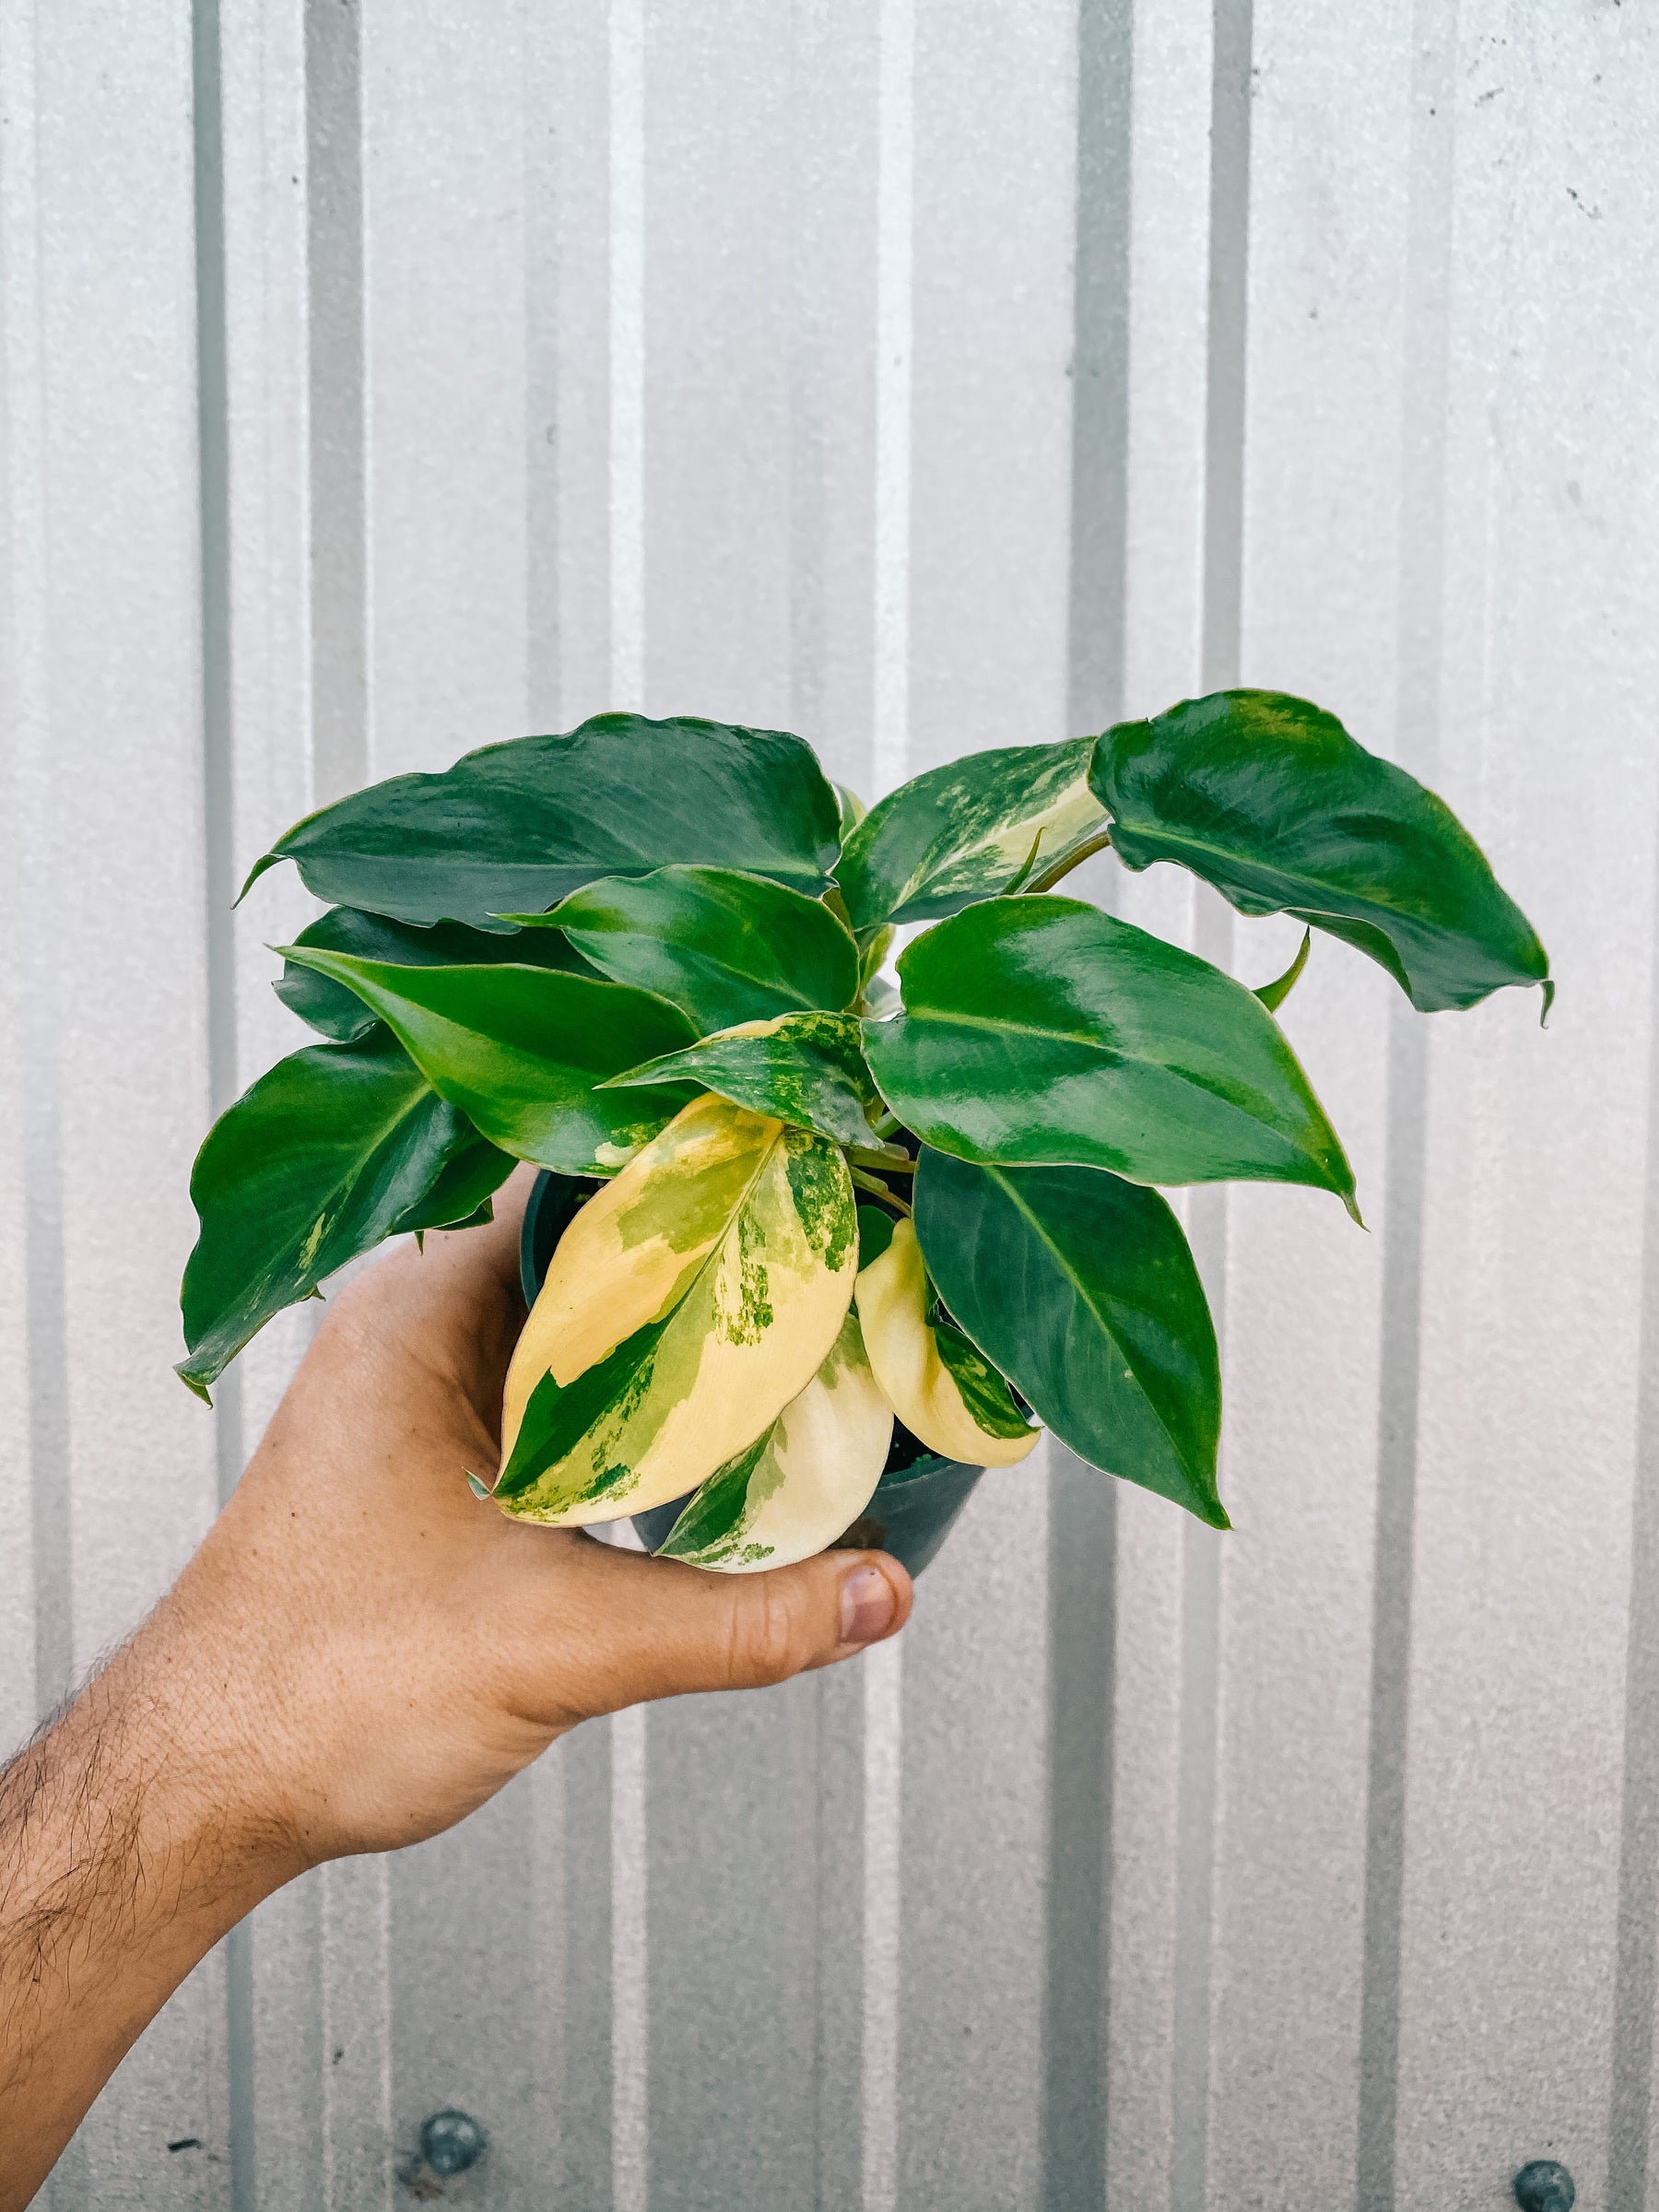 4" Variegated Philodendron 'Burle Marx'